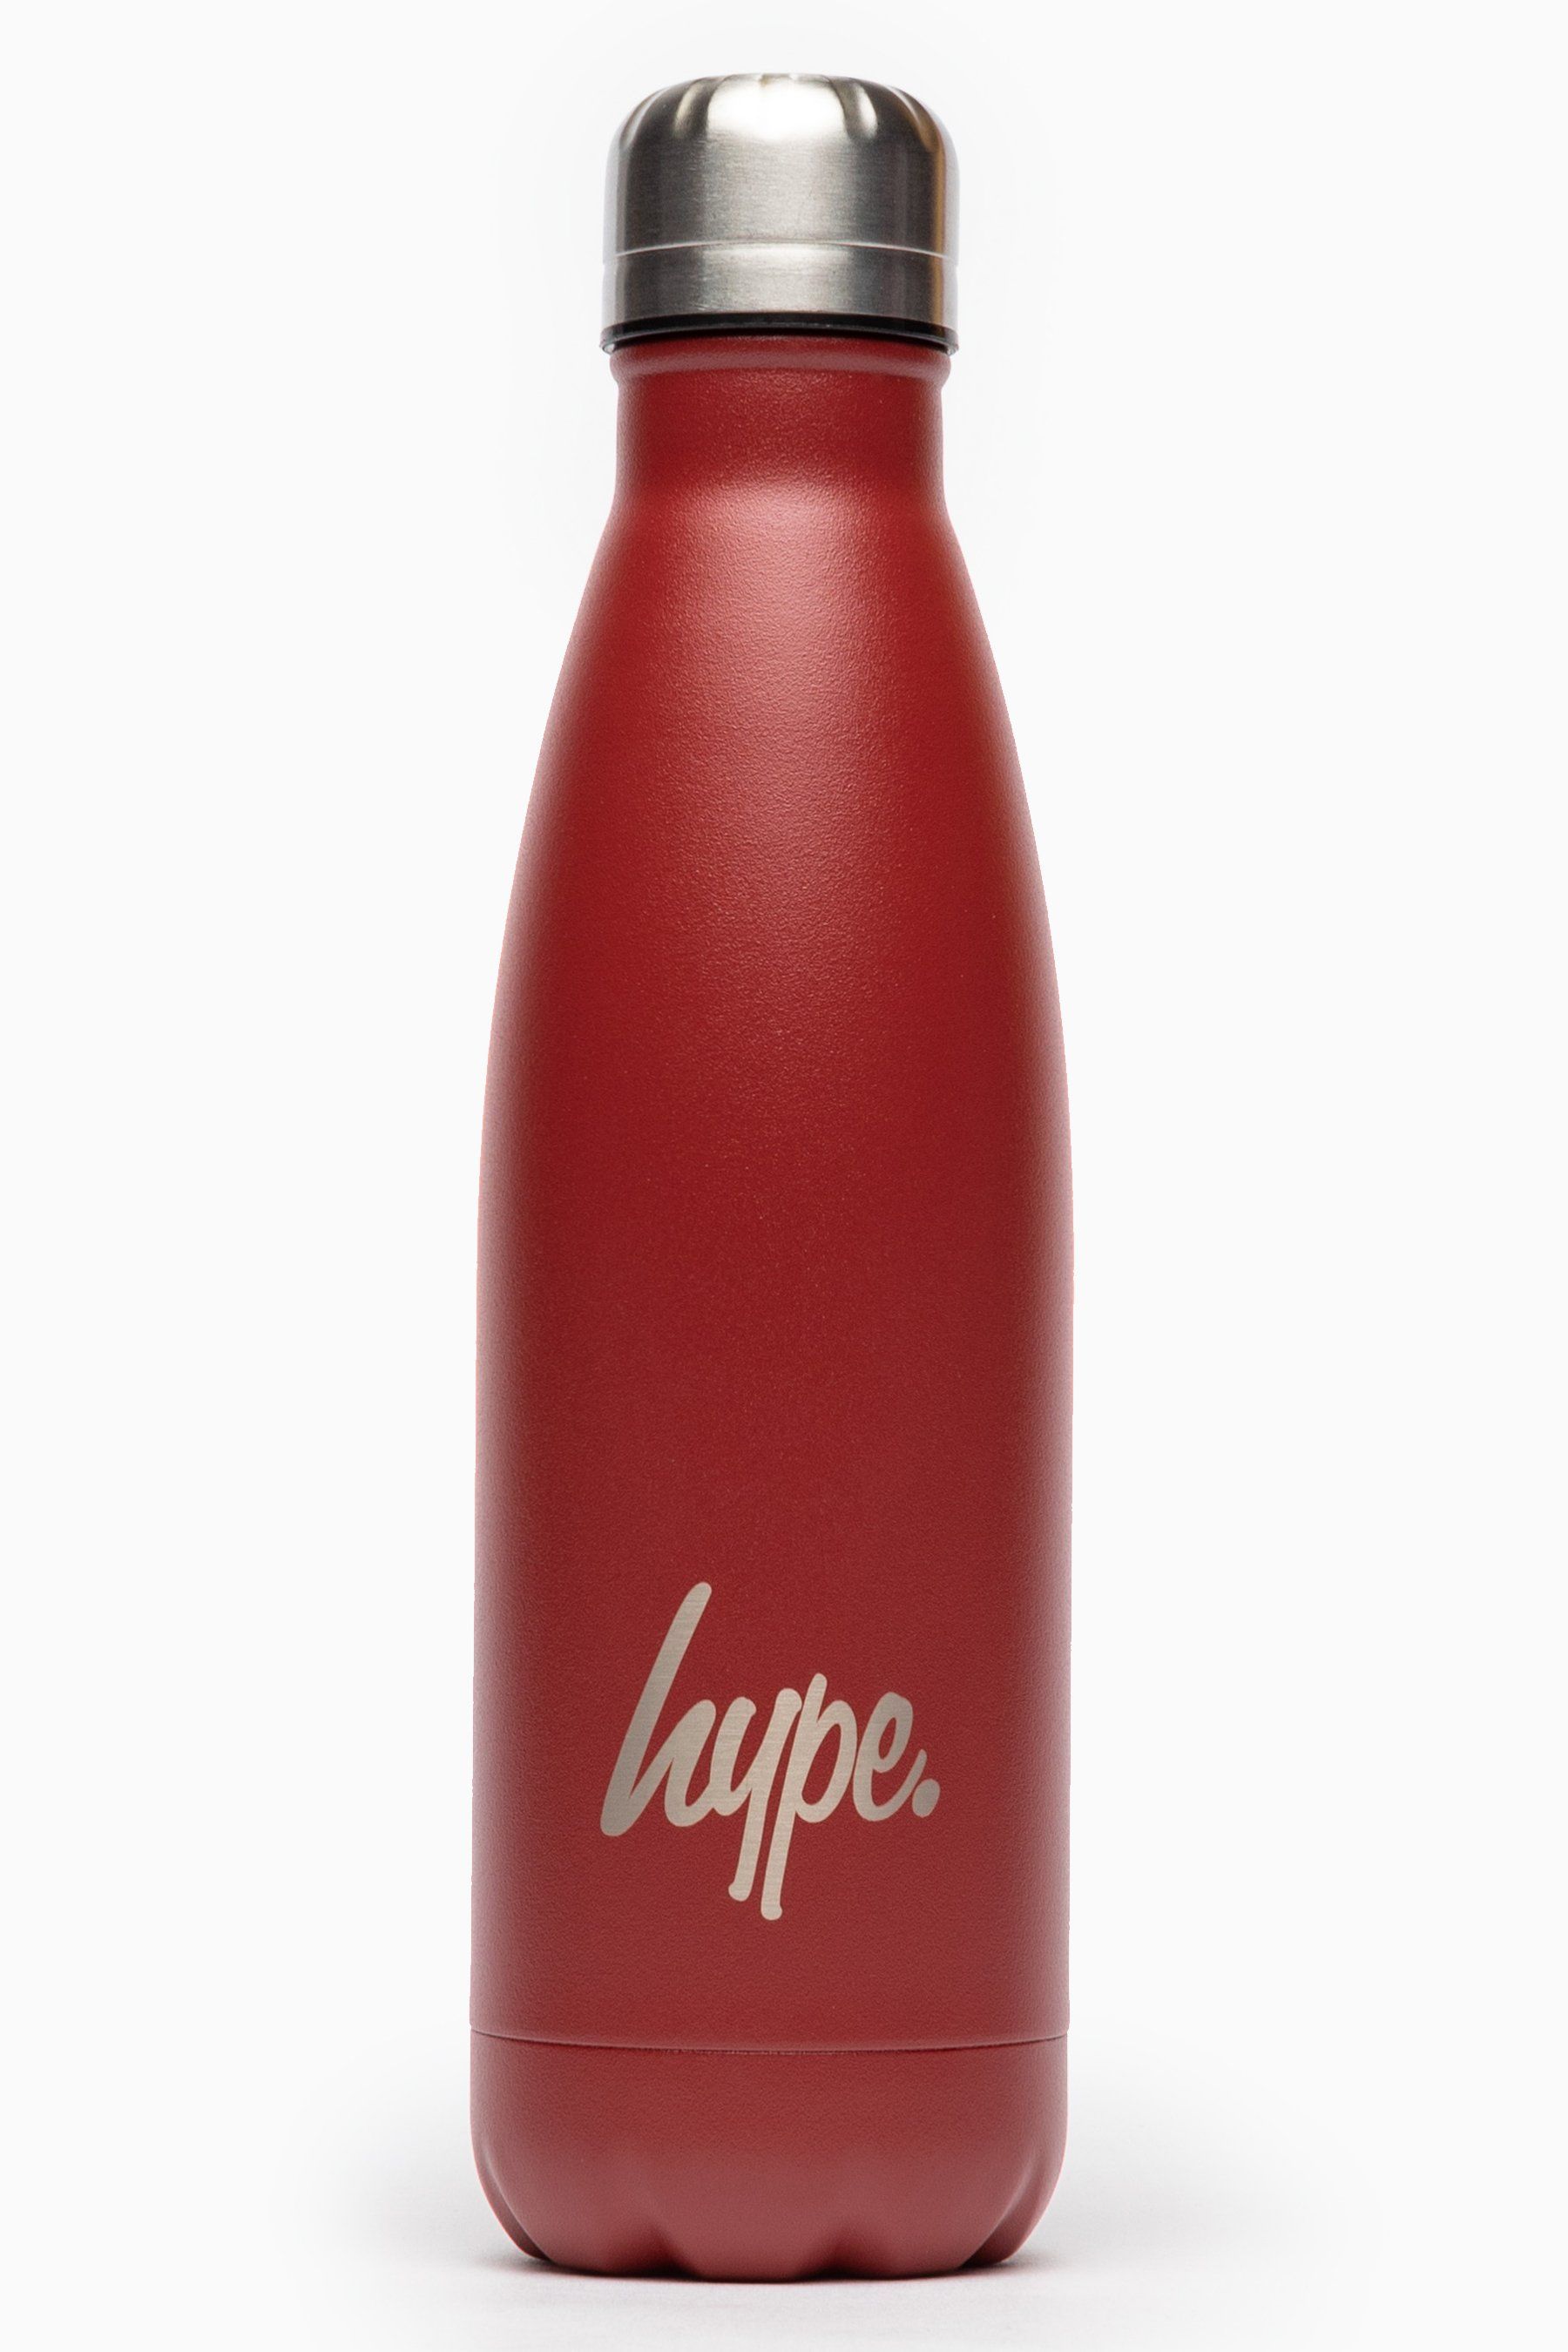 Keeping you hydrated, in style. Meet the HYPE. red powder coated bottle, perfect for when you're on the go. Designed in Aluminium to ensure your water stays ice-cold and for chillier days, keeping your oat milk latte warm for longer. Why not grab one of our lunch bags or backpacks with a bottle holder to complete the look, we suggest grabbing the matching set.